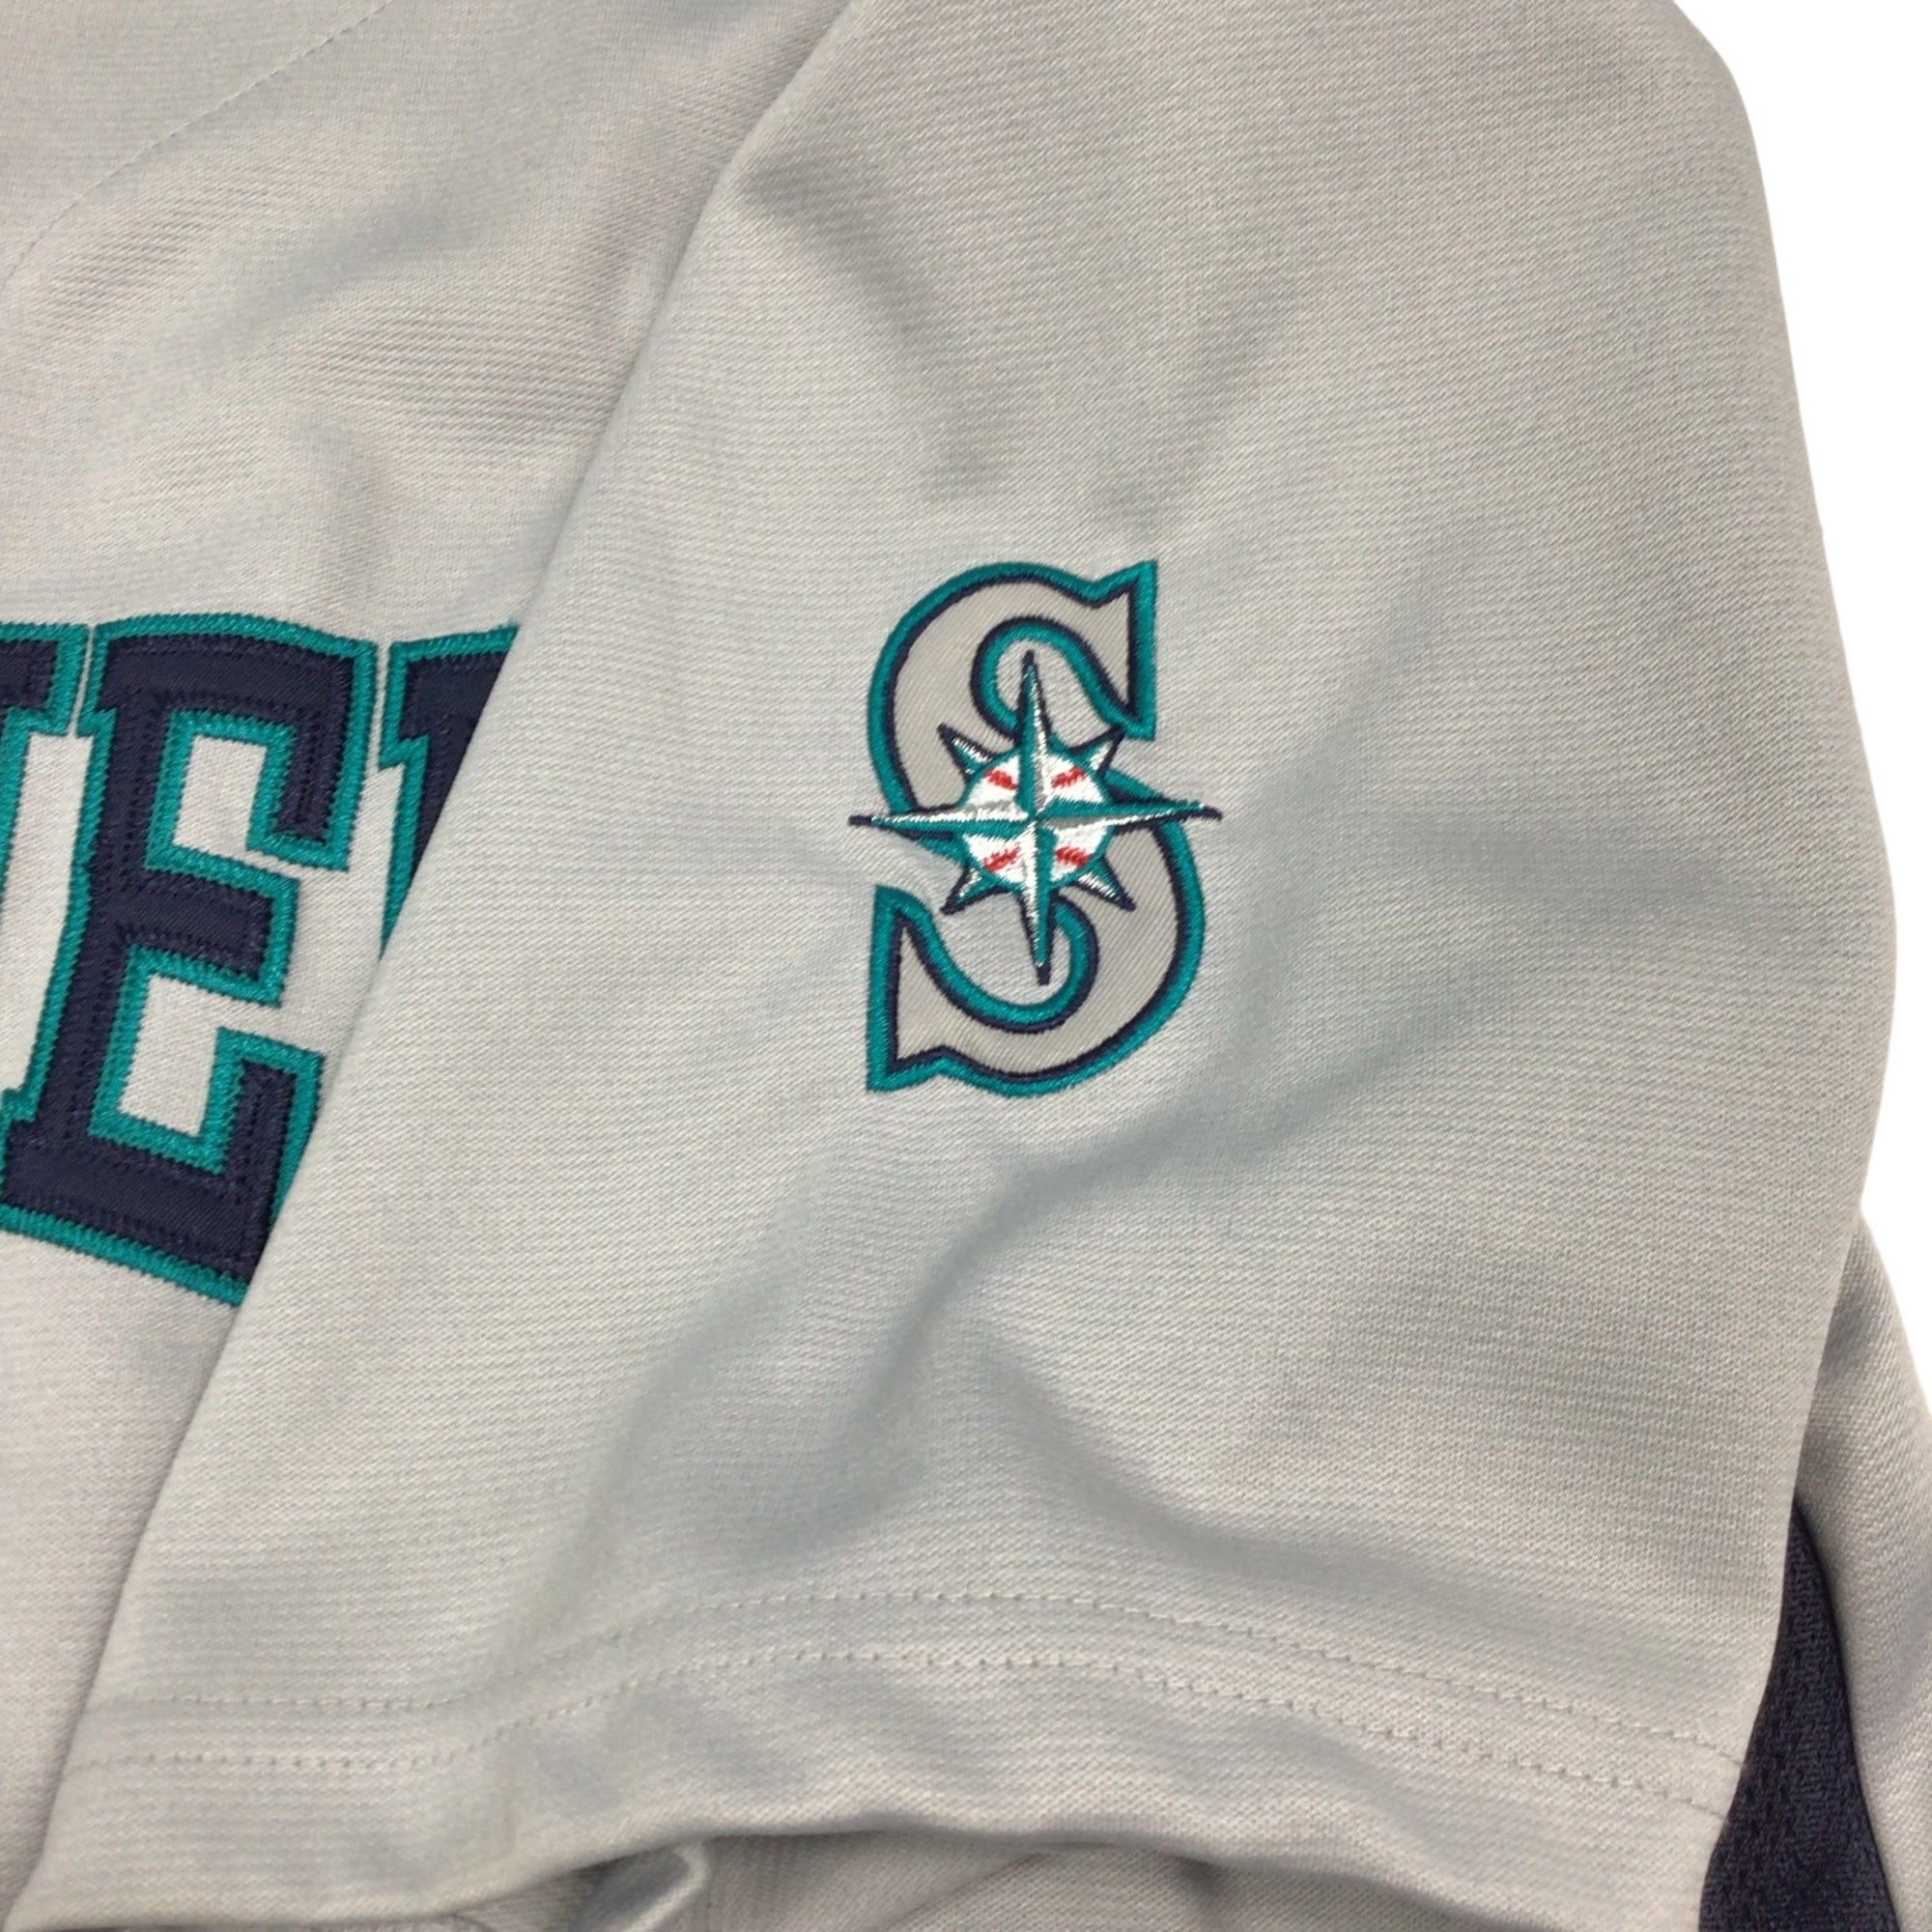 MLB SEATTLE MARINERS JERSEY (INFANT), Men's Fashion, Activewear on Carousell